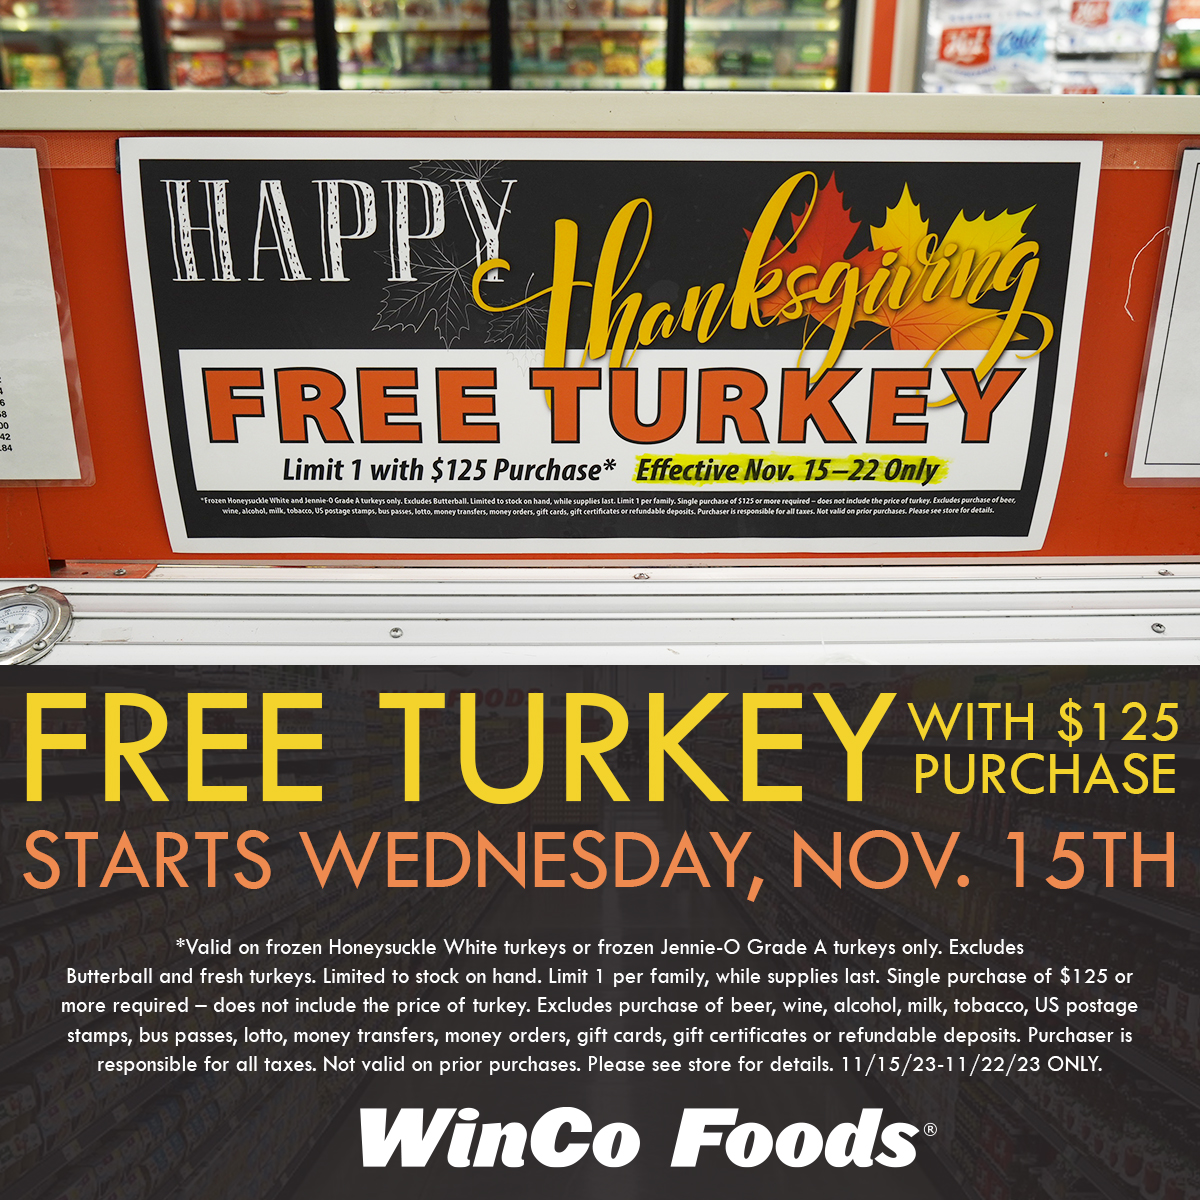 Winco free turkey with $125 purchase